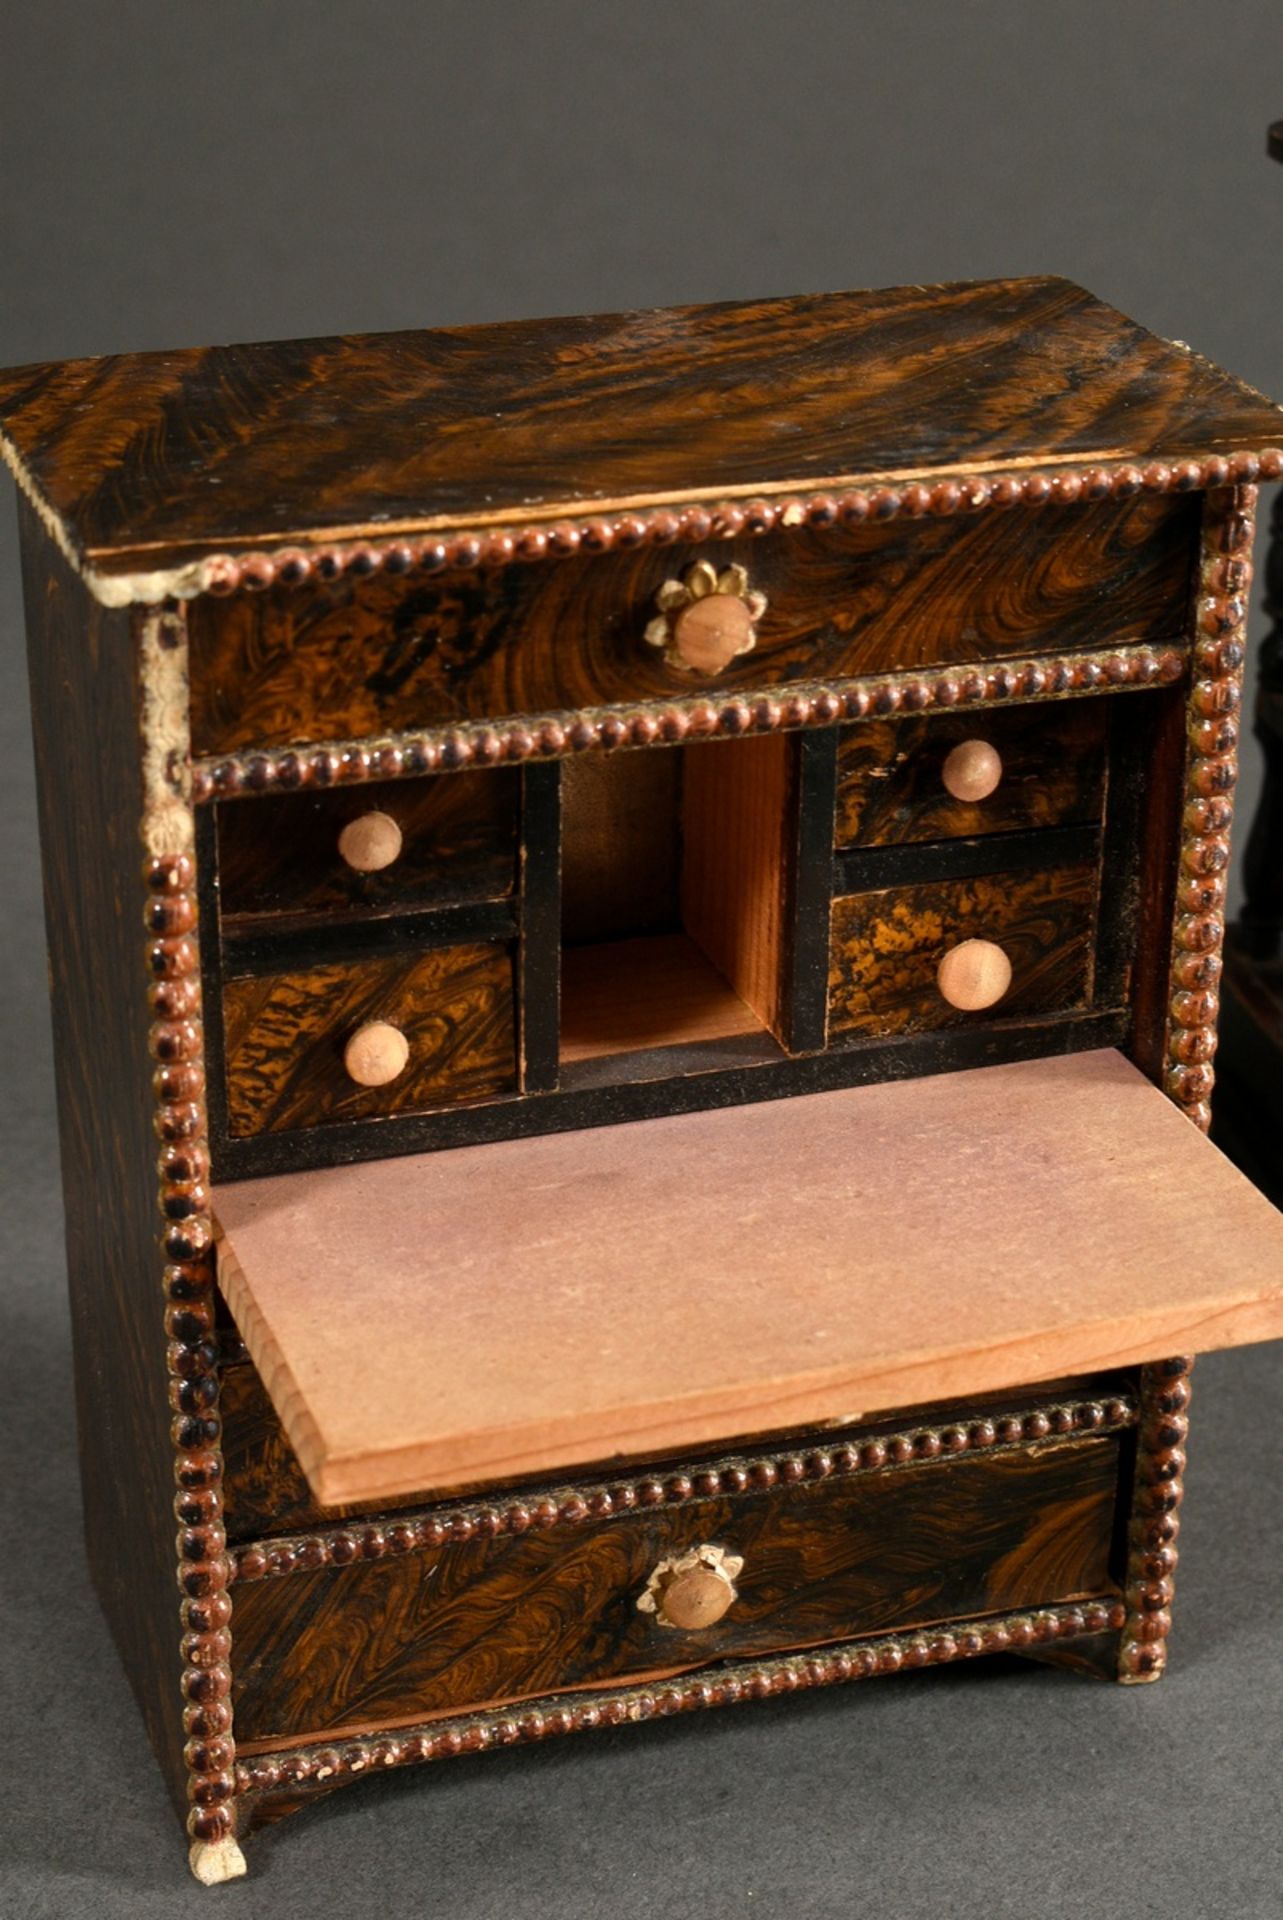 8 doll's houses bedroom furniture in Boulle style, softwood dark stained with ornamental gold print - Image 6 of 8